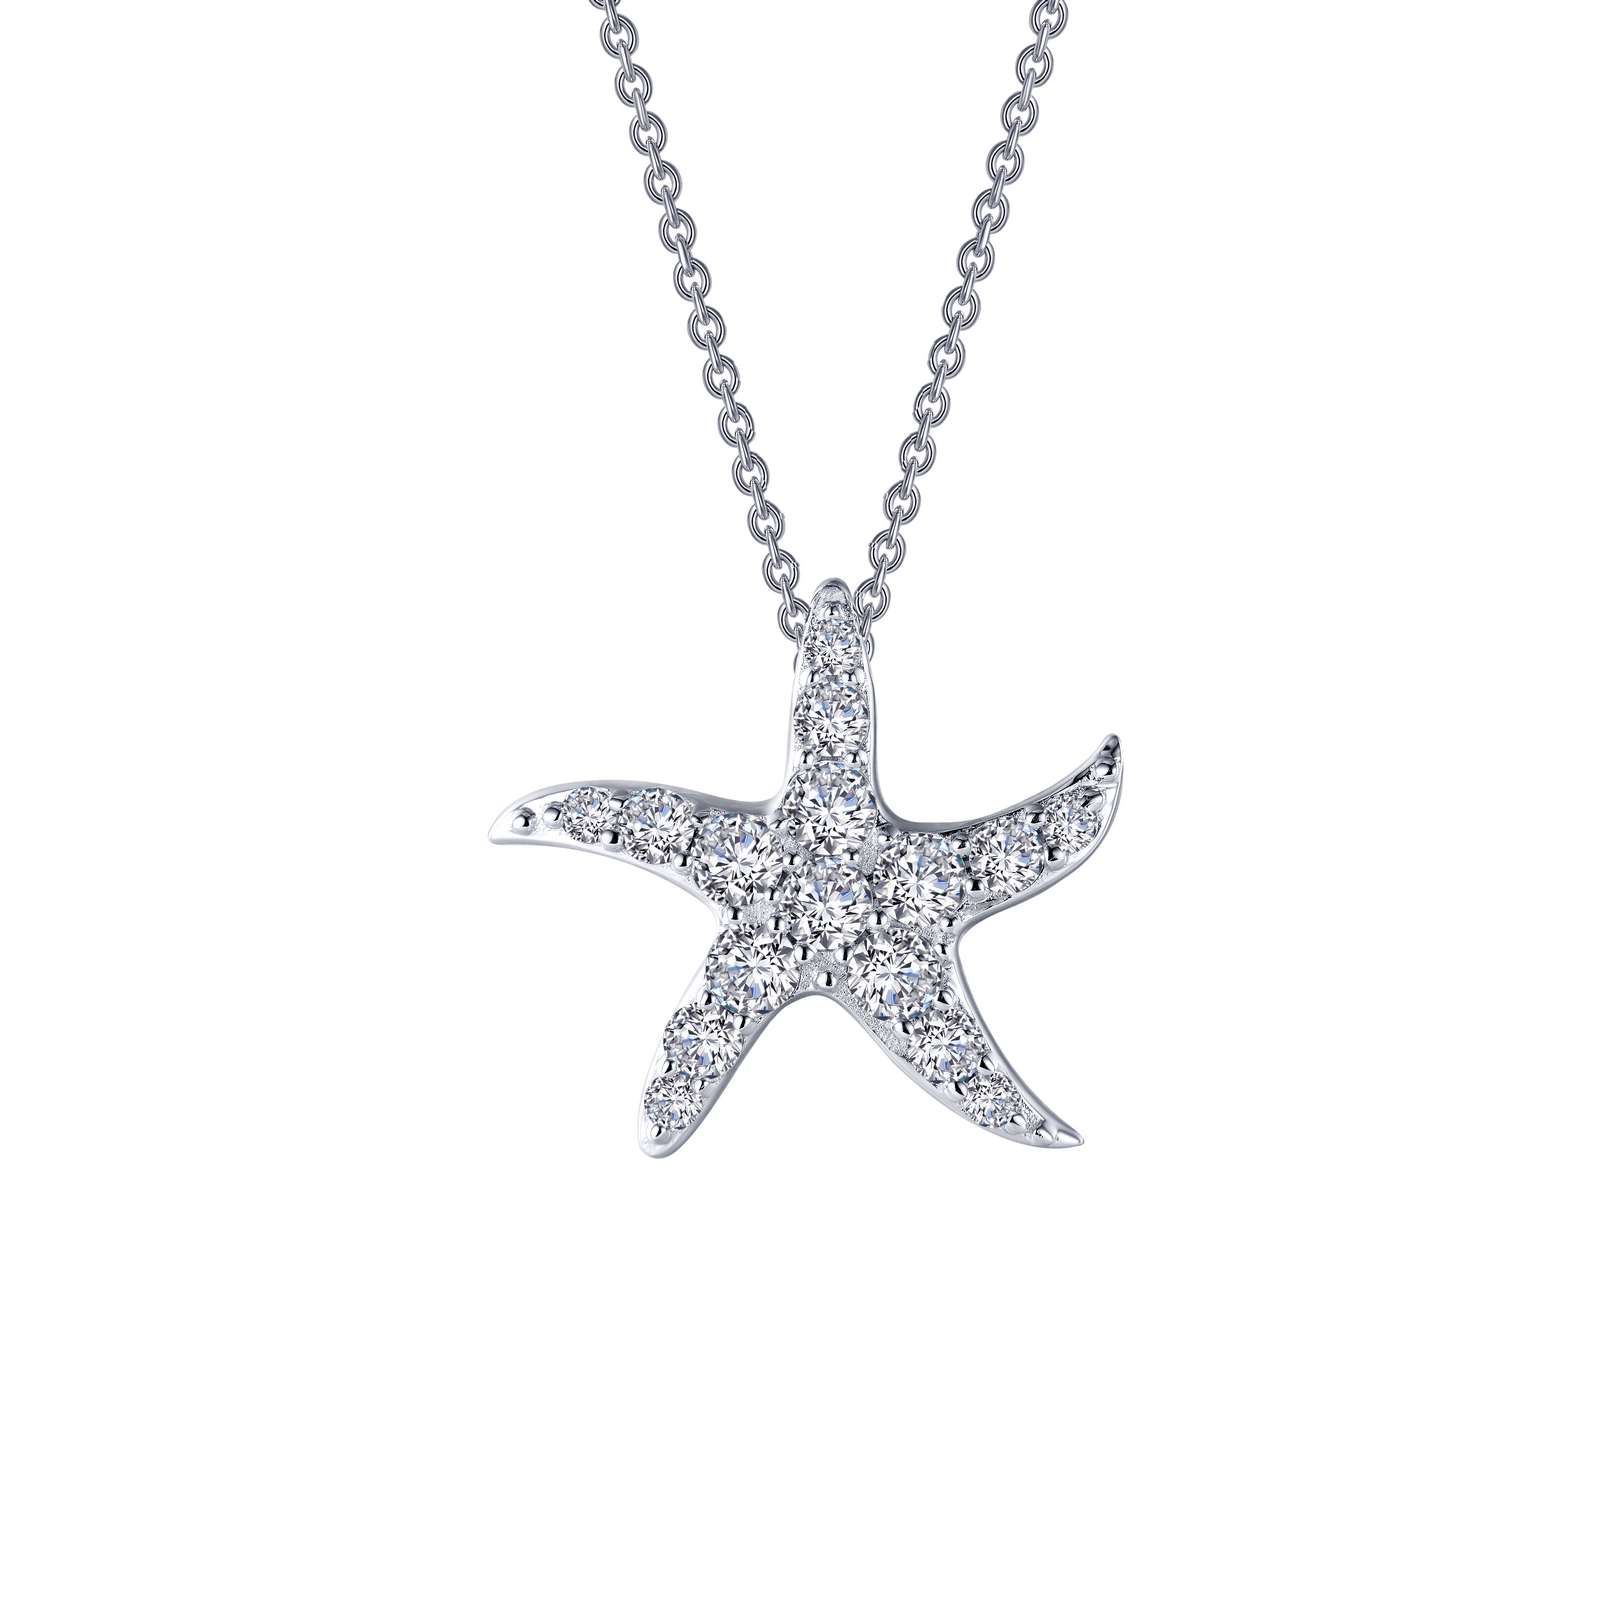 Whimsical Starfish Necklace Griner Jewelry Co. Moultrie, GA